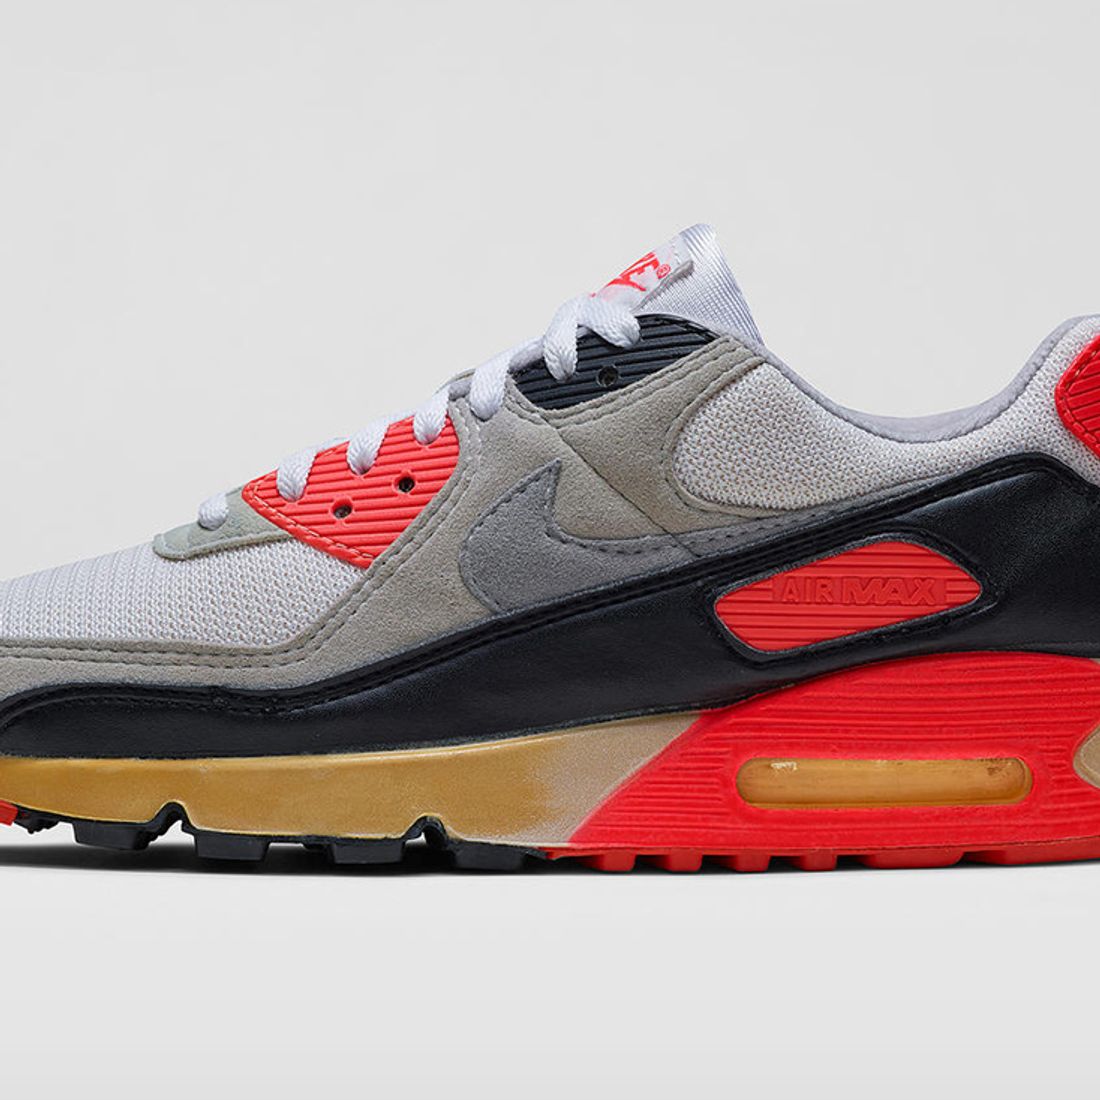 kunstmest Anesthesie Grillig The All-Time Greatest Nike Air Max 90s: Part 1 - Sneaker Freaker